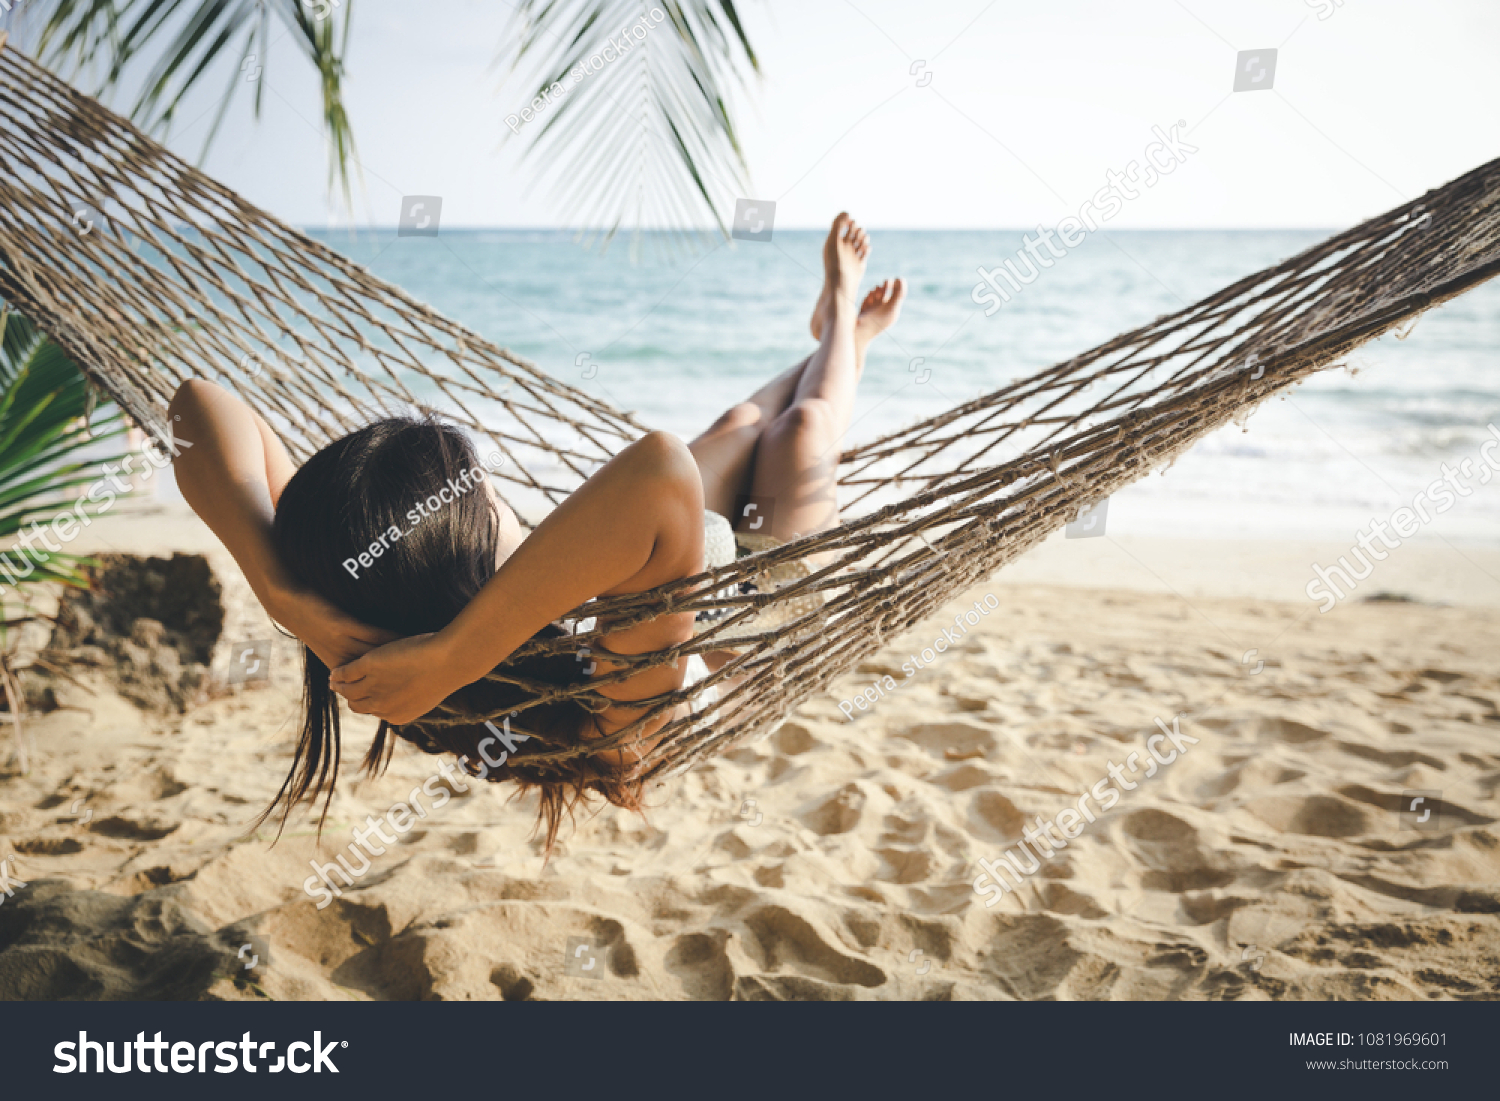 Summer vacations concept, Happy woman with white bikini, hat and shorts Jeans relaxing in hammock on tropical beach at sunset, Koh mak, Thailand #1081969601